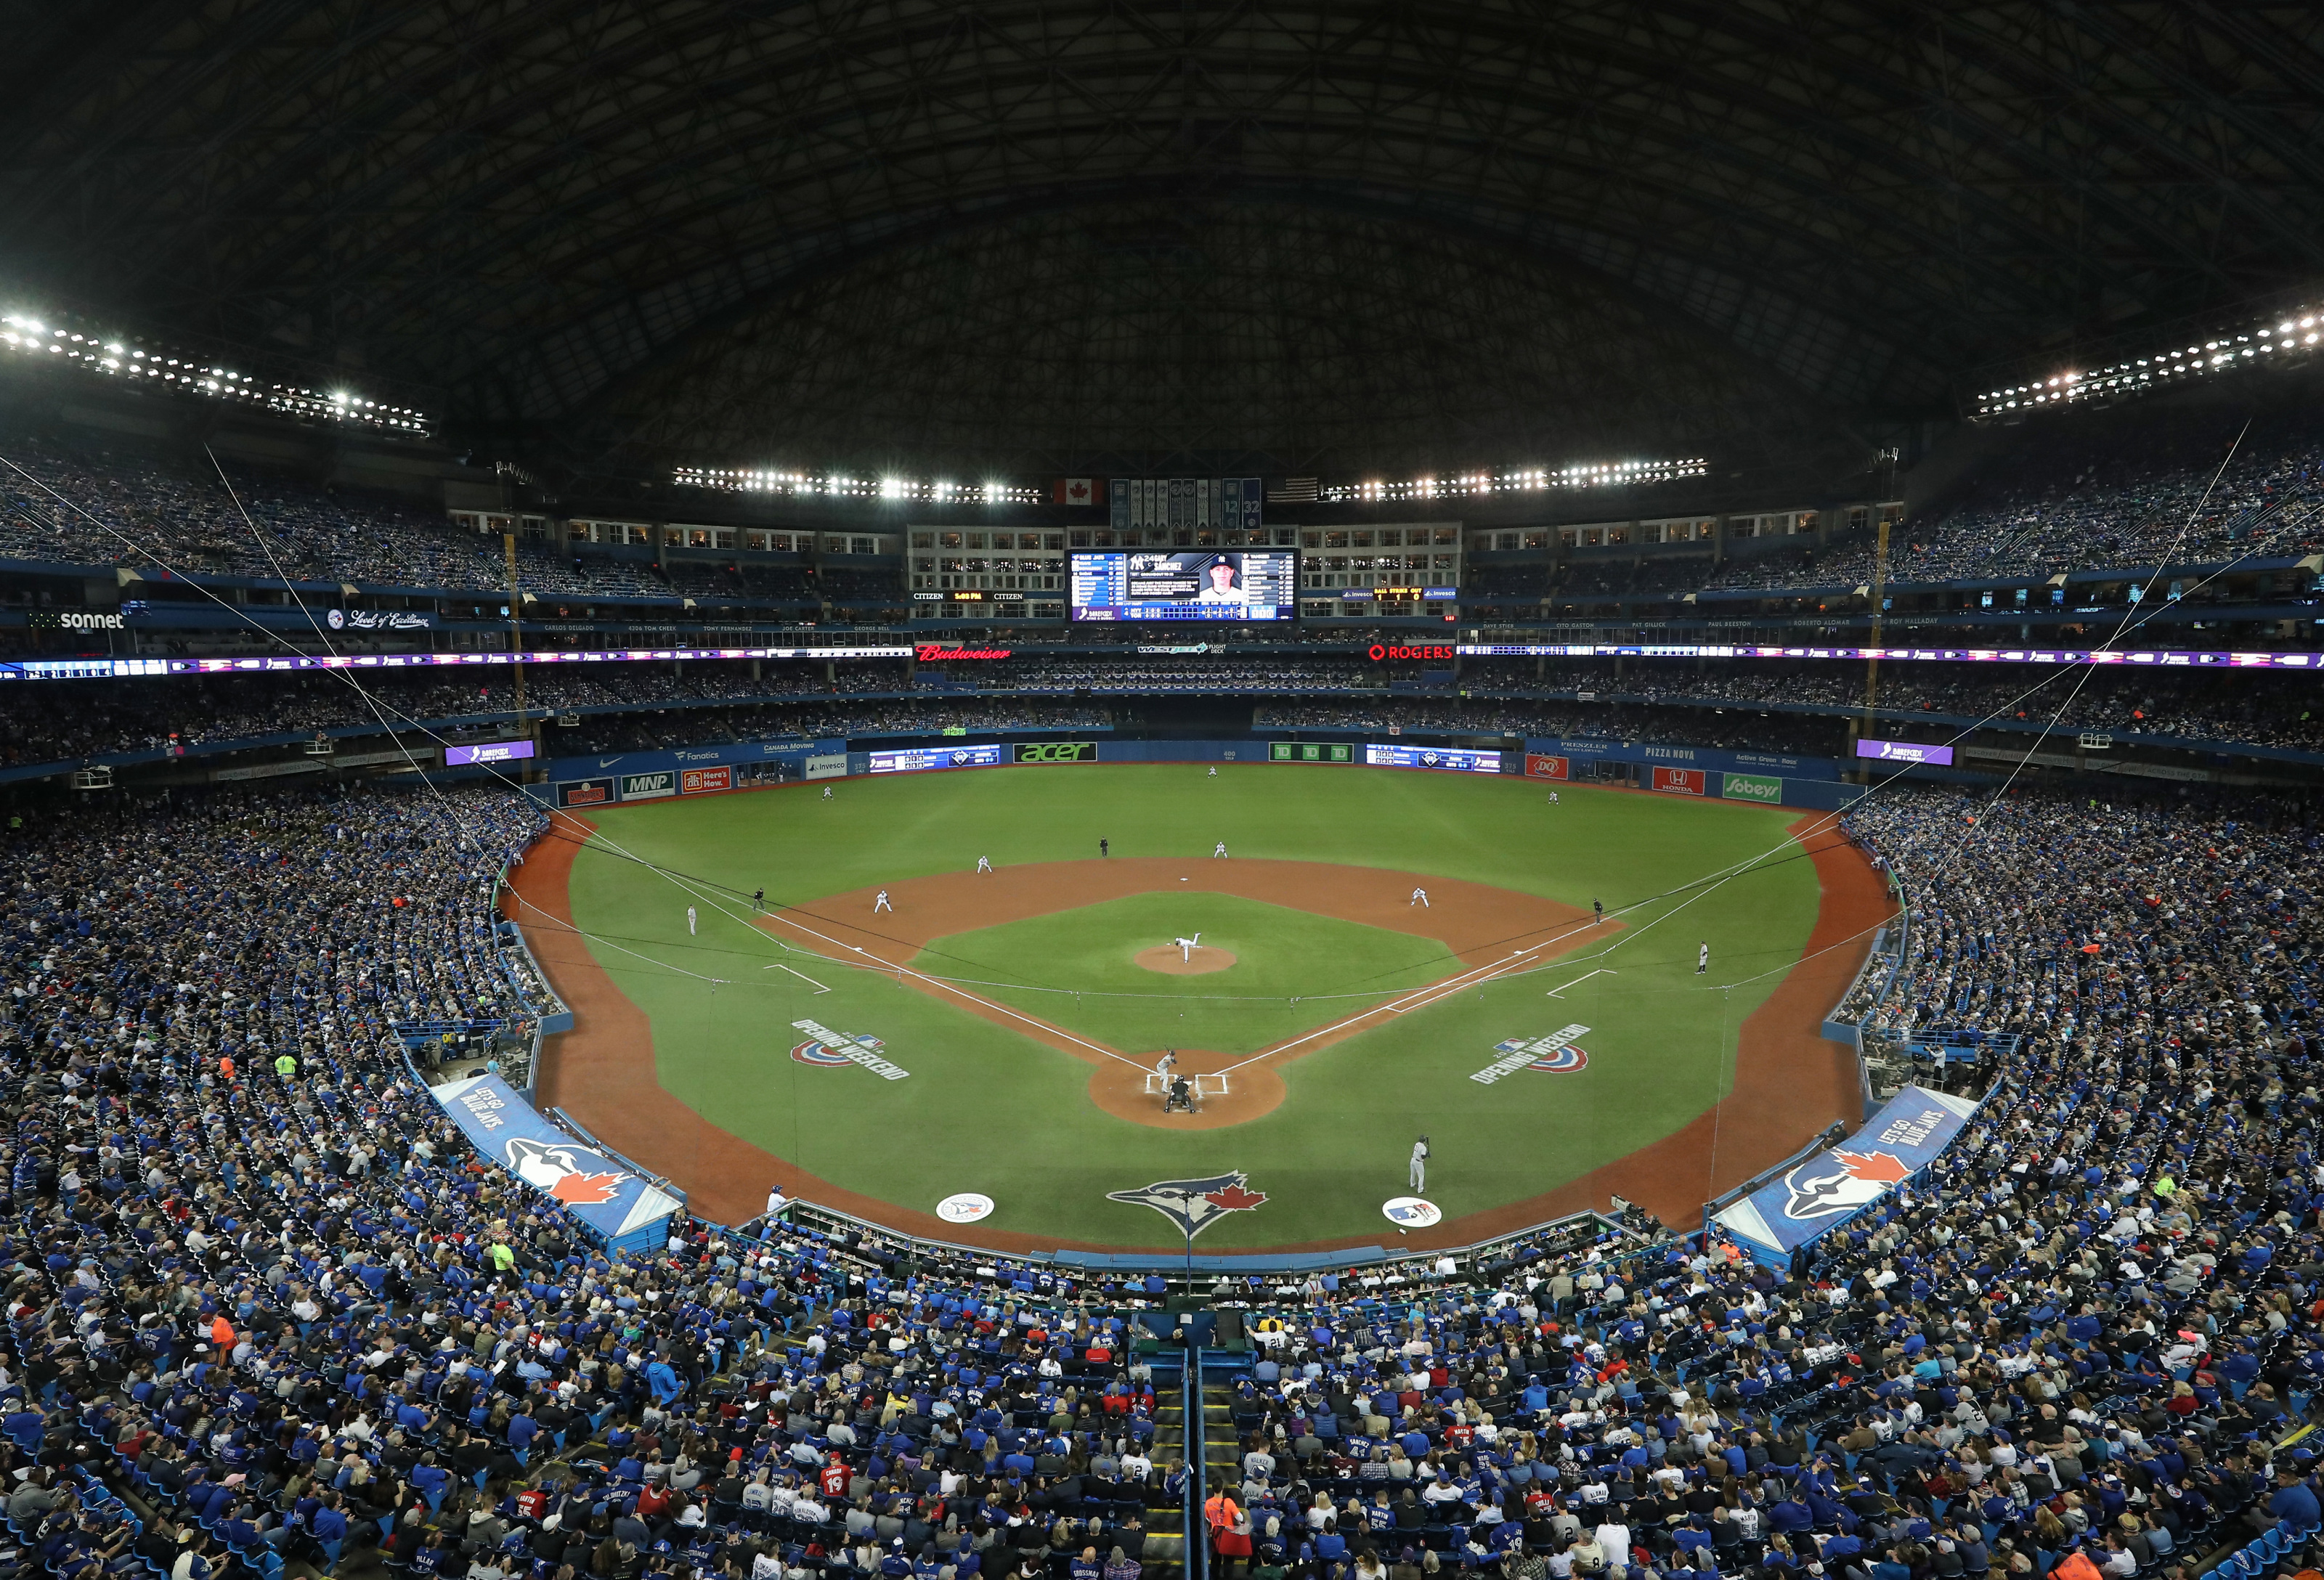 It would be nice if the Blue Jays had an area at the Rogers Centre  dedicated to their history where fans could interact and take pictures of  the two World Series trophies